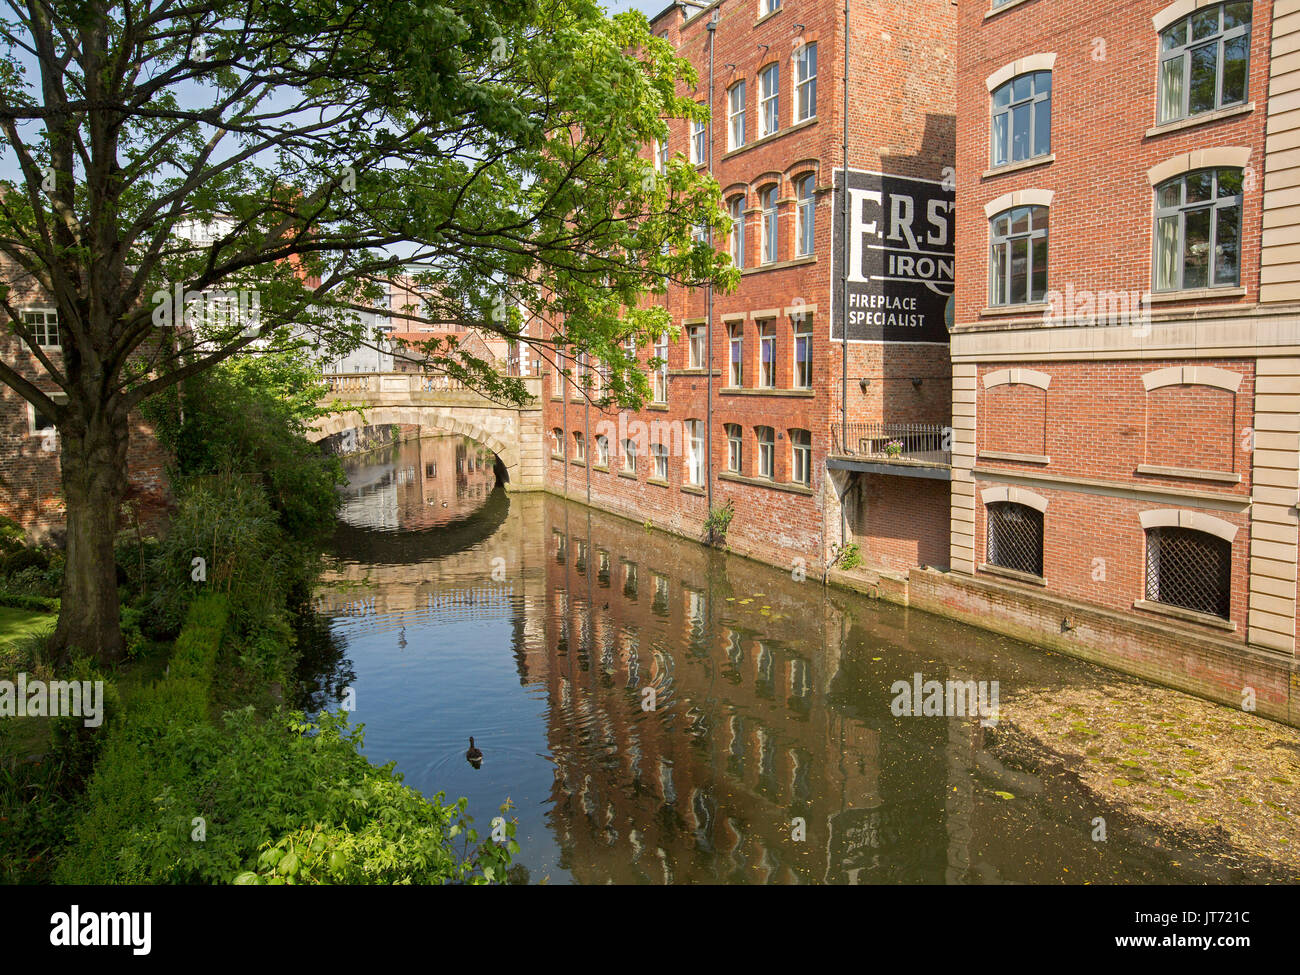 Calm blue waters of narrow River Foss flowing beside red brick walls of buildings and under arched bridge and trees in city of York, England Stock Photo